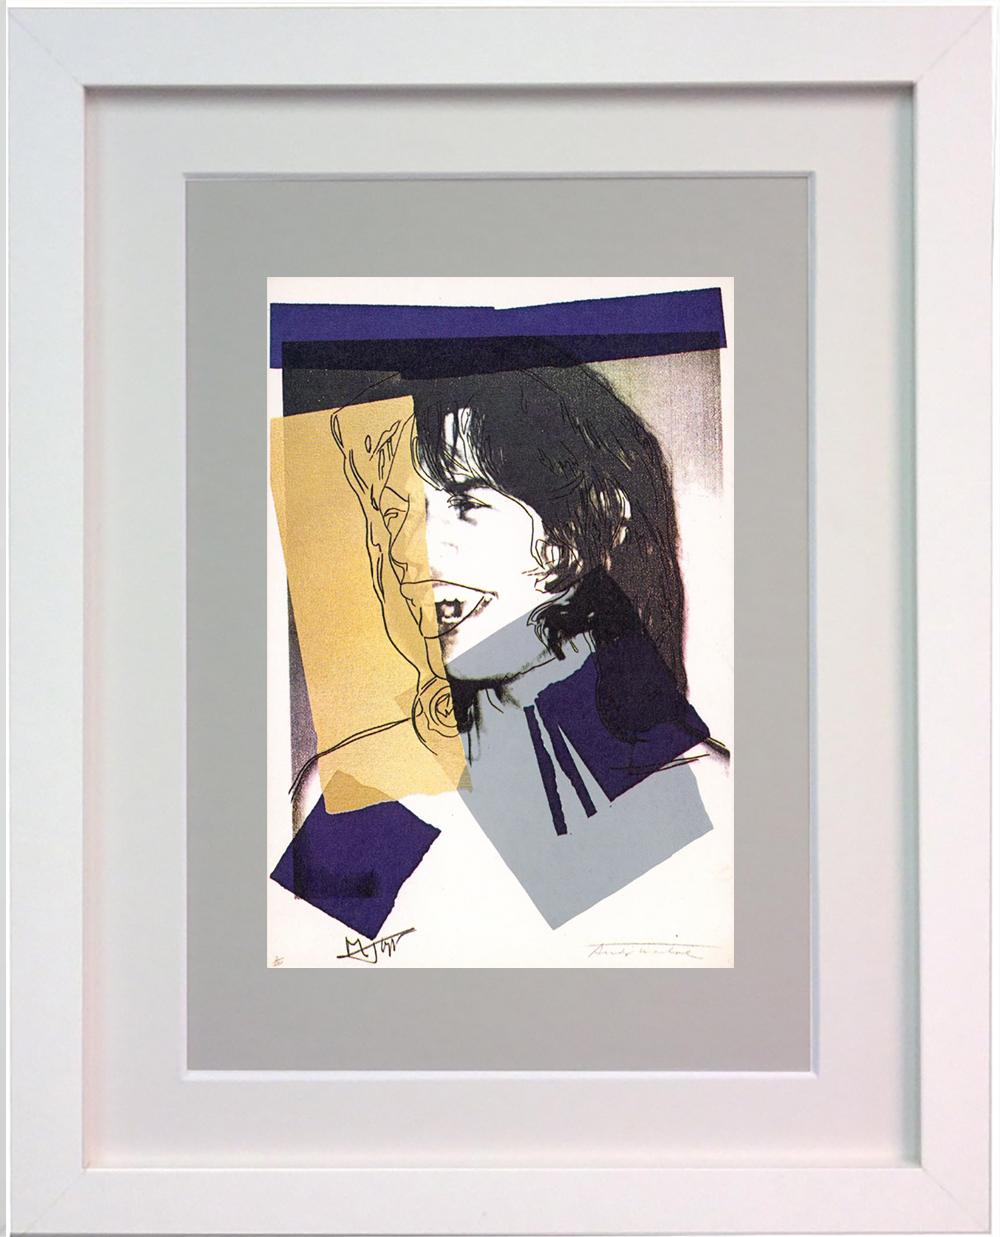 Andy Warhol, Mick Jagger, Framed Announcement-card, 1975